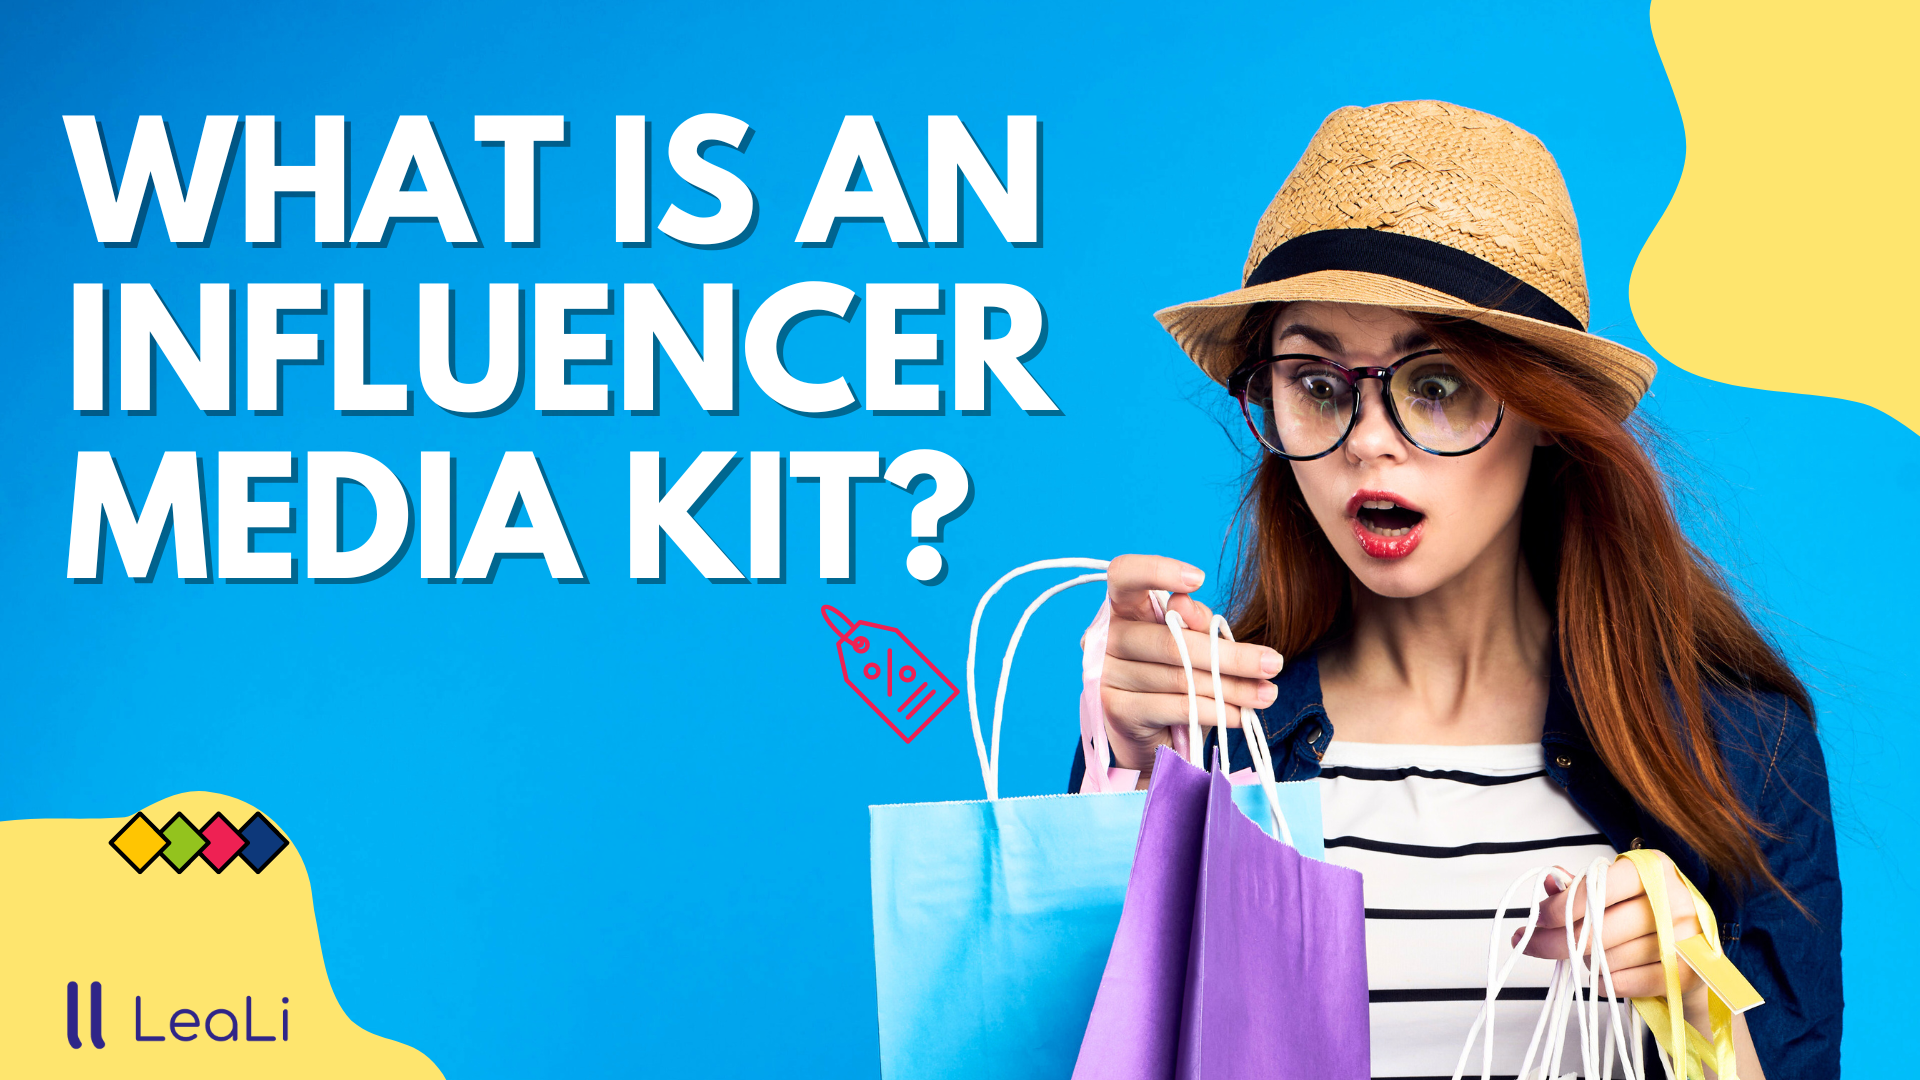 What is an Influencer Media Kit?